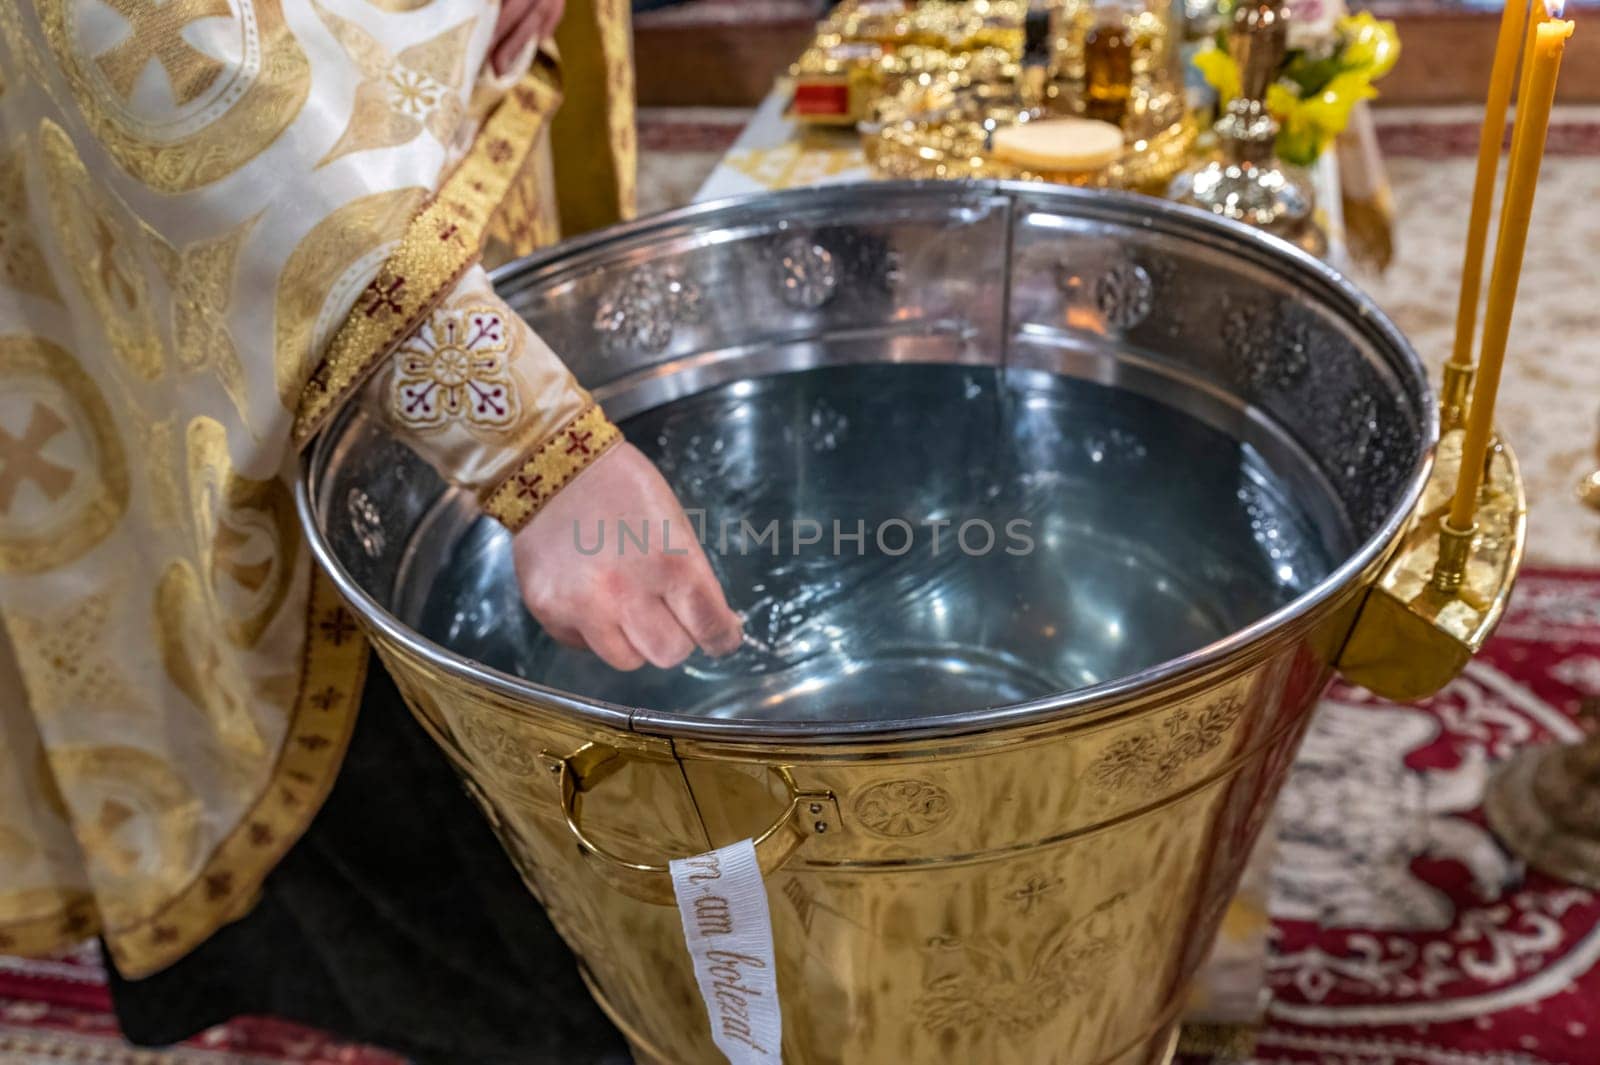 baptismal font with water for the Orthodox baptism in the church by carfedeph